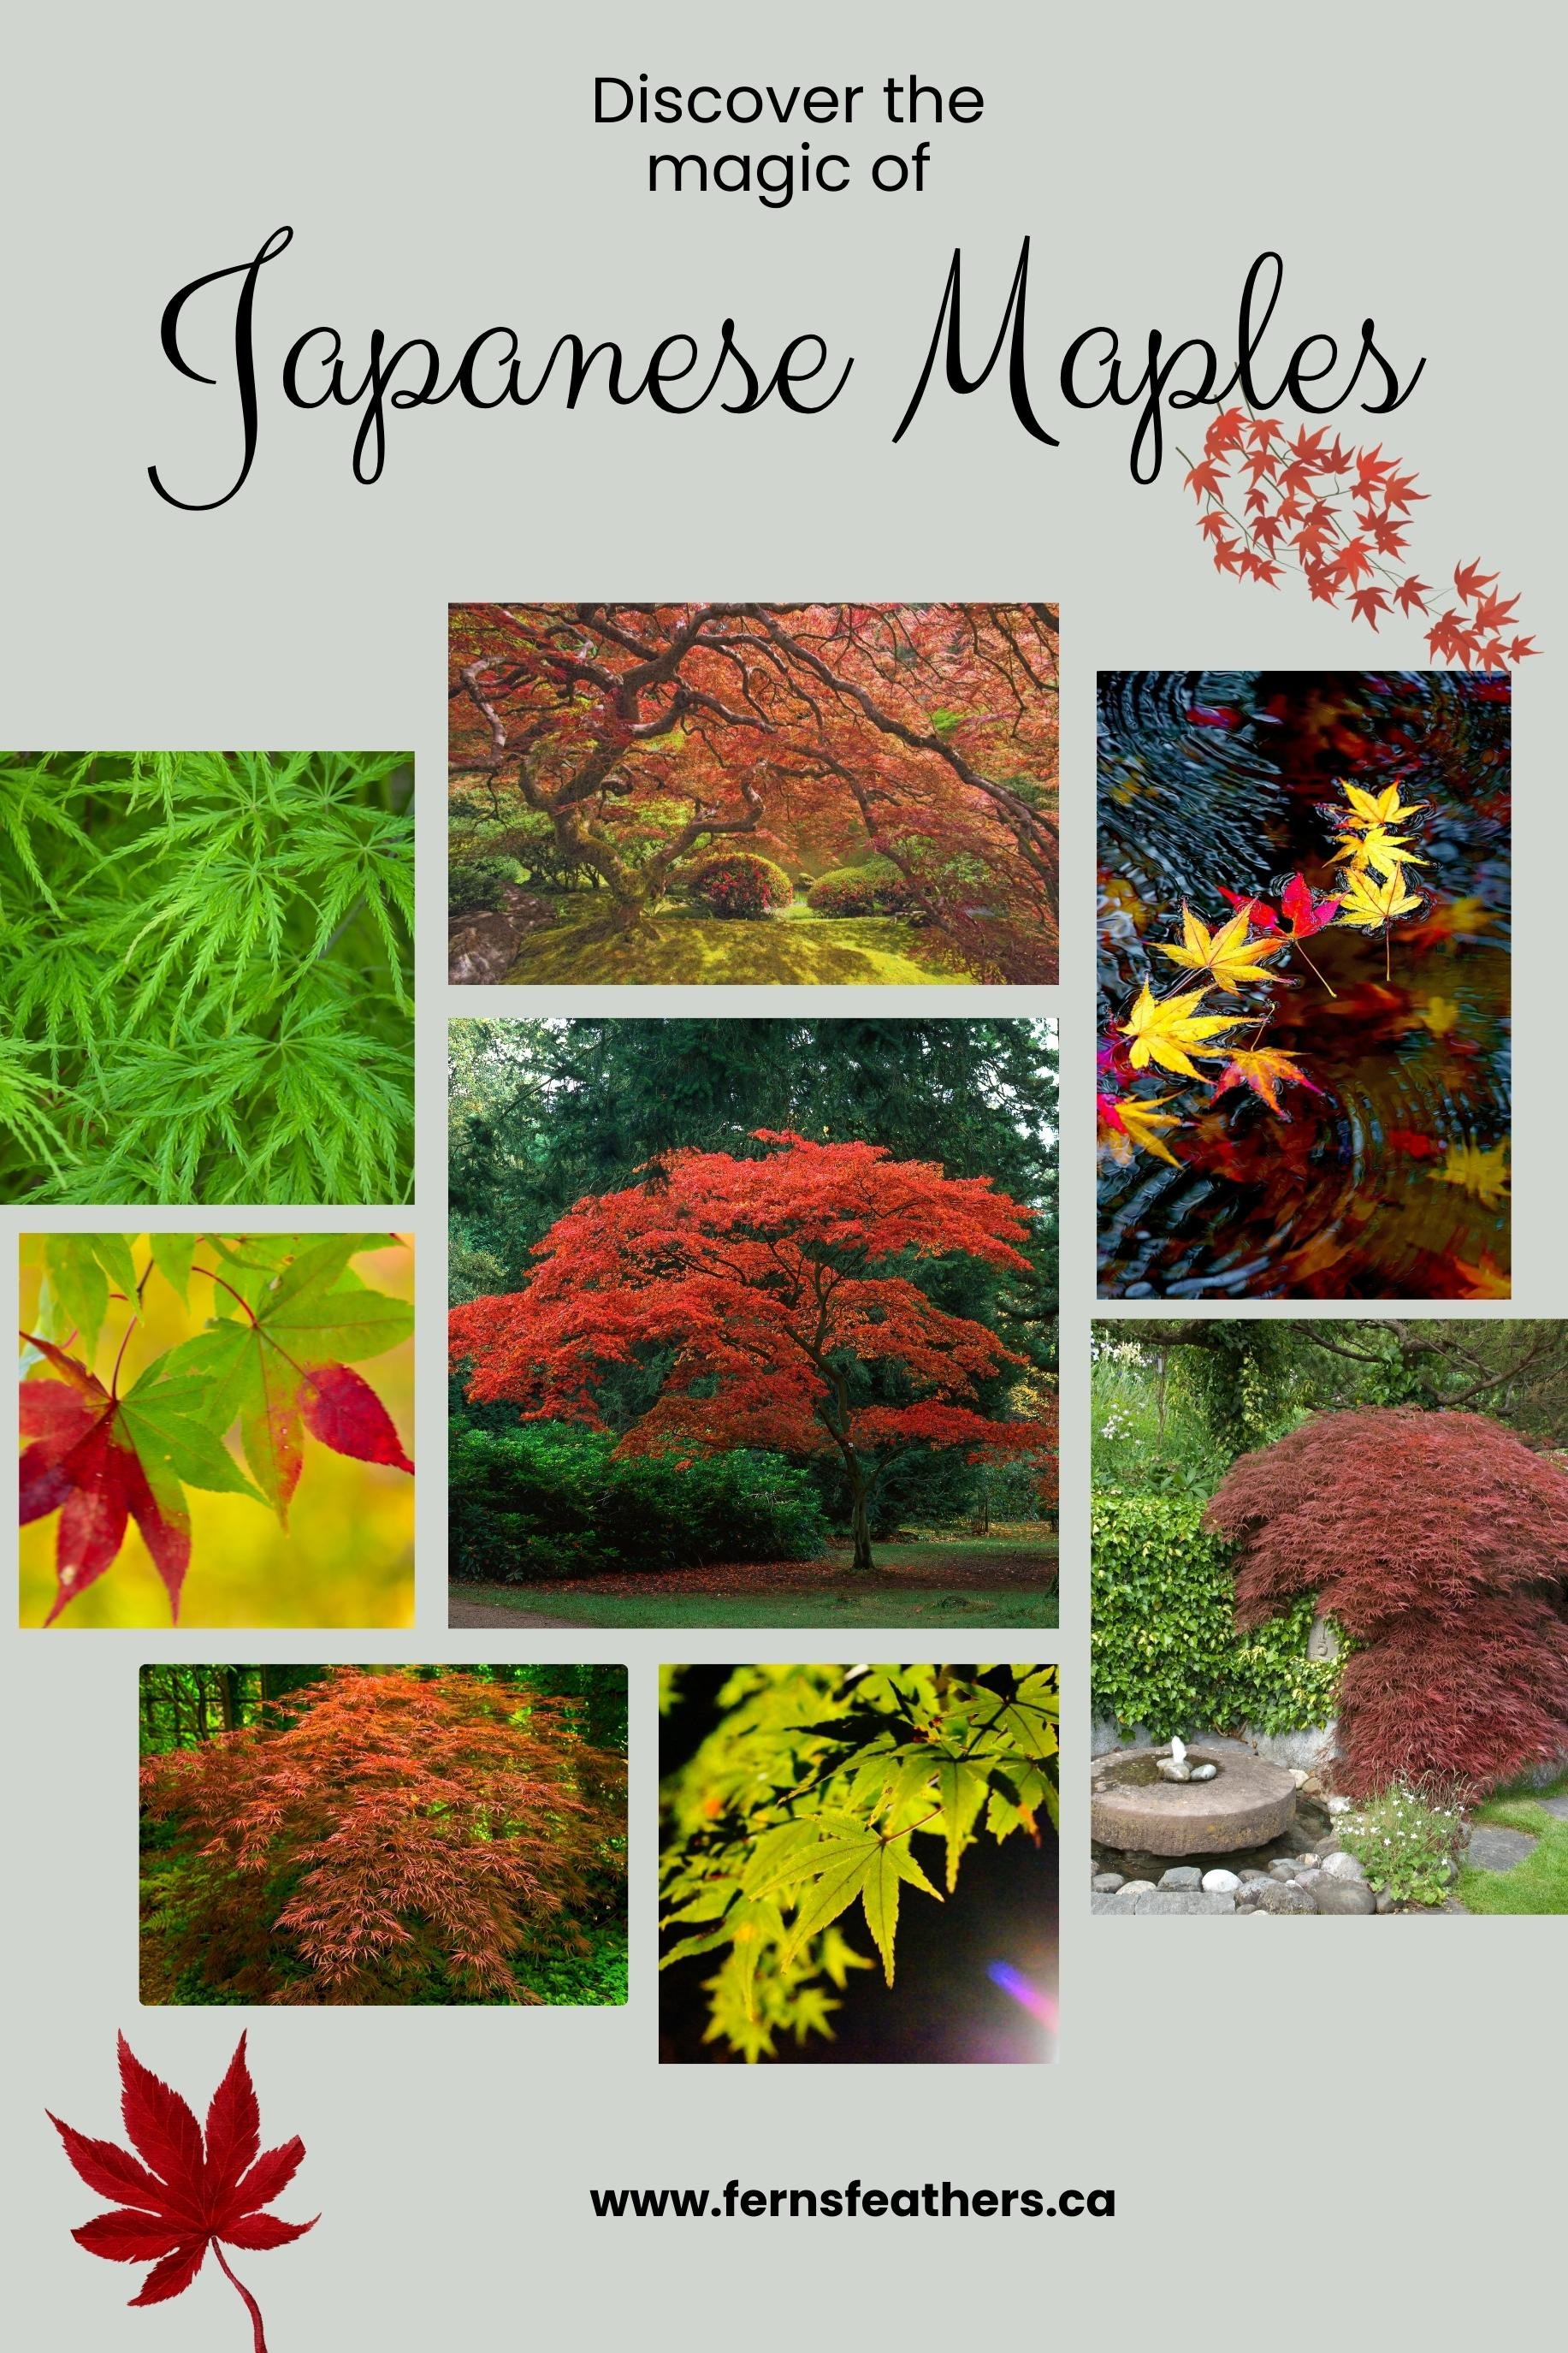 Photo montage of mature Japanese Maples